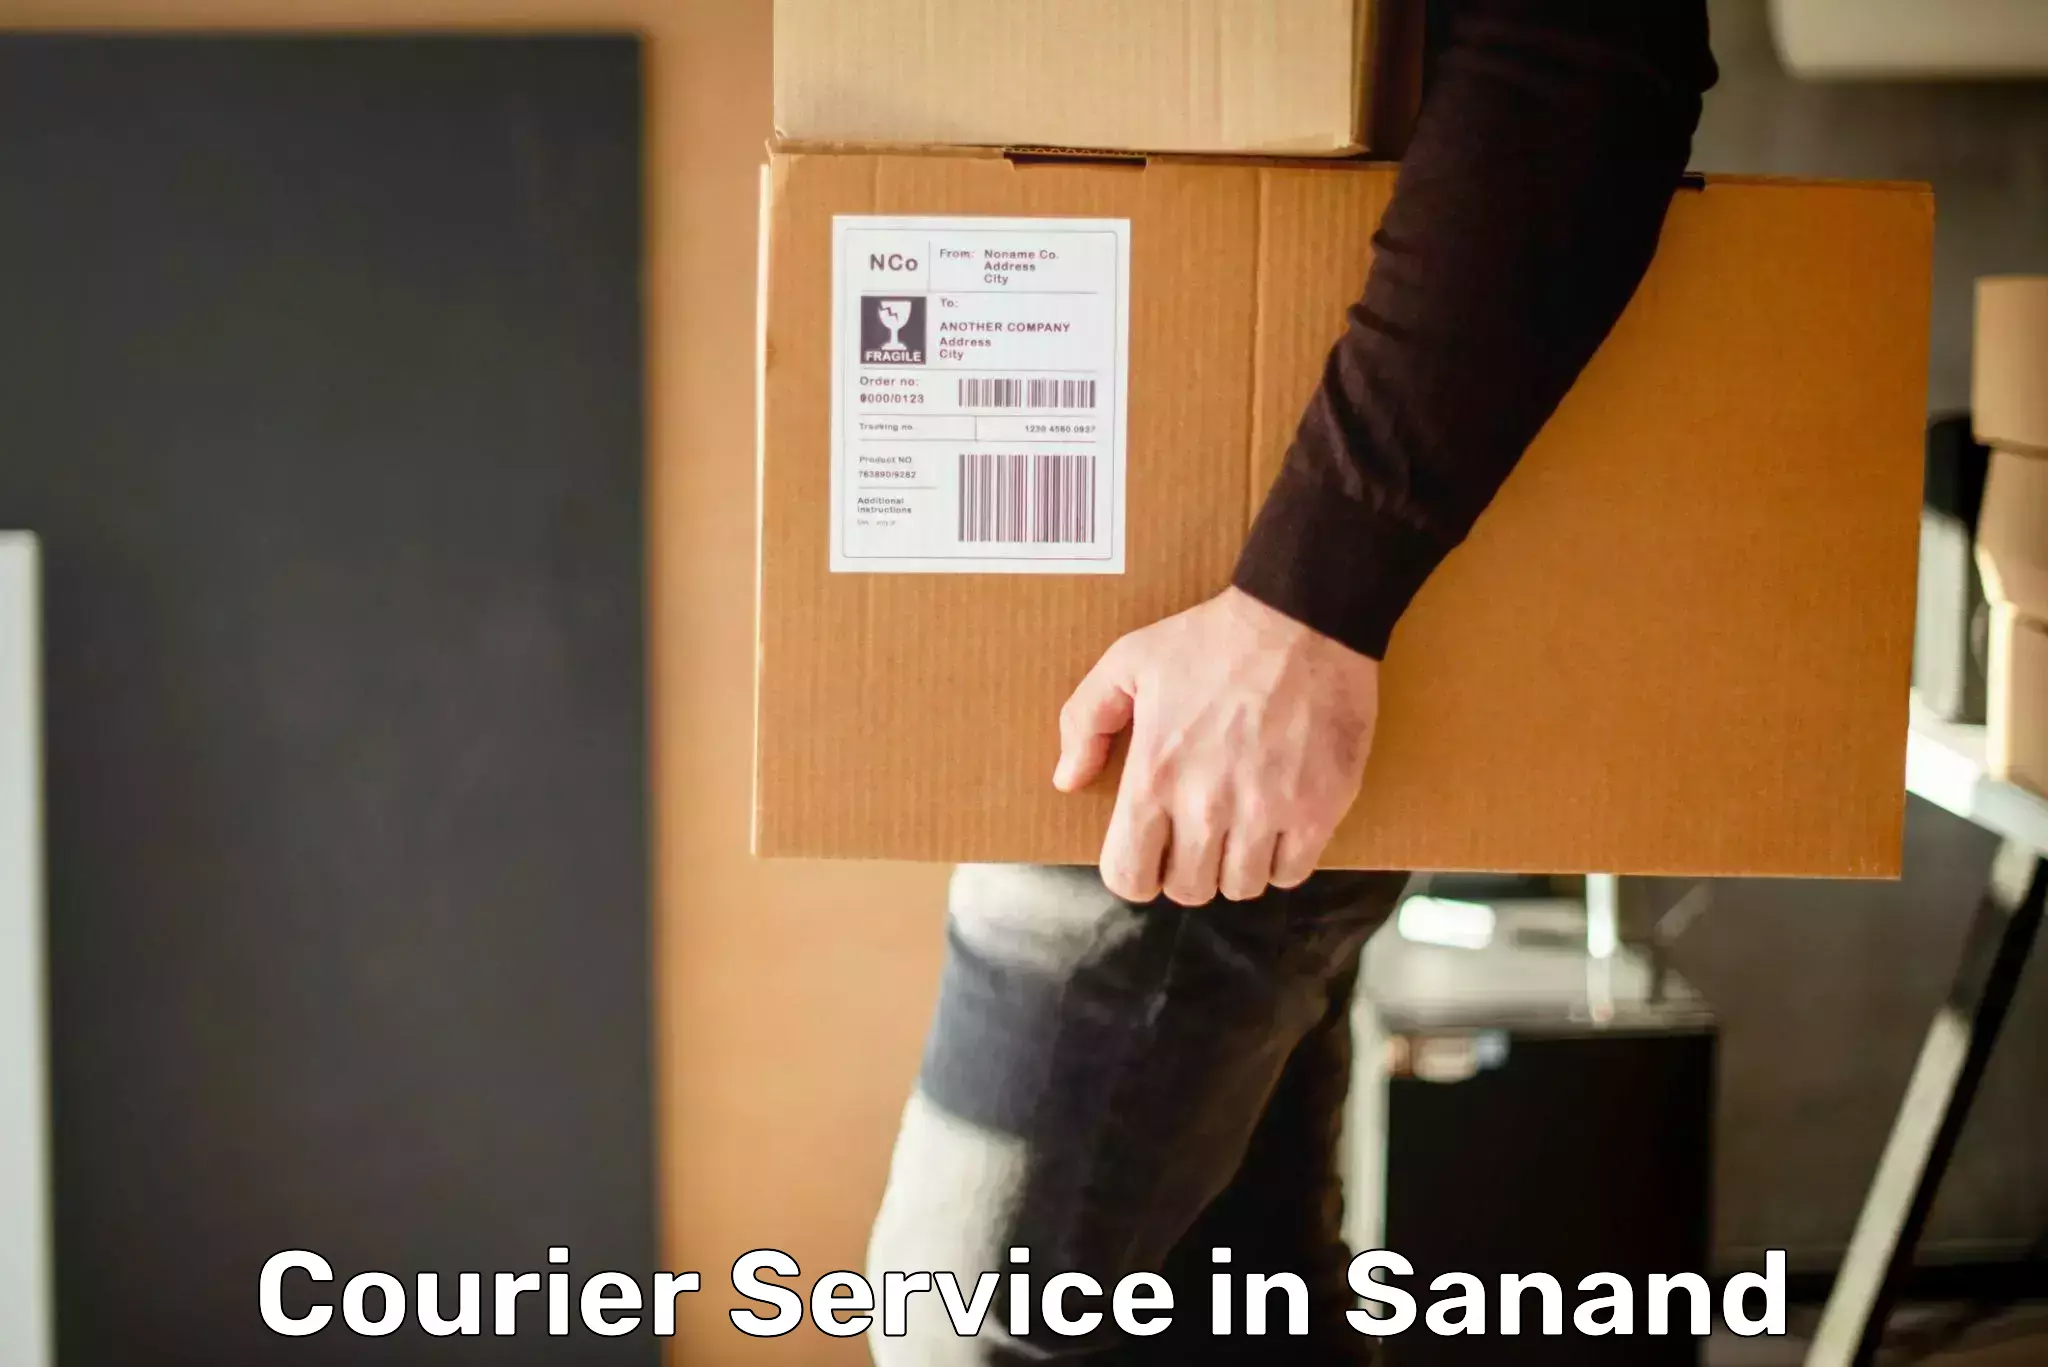 Logistics efficiency in Sanand